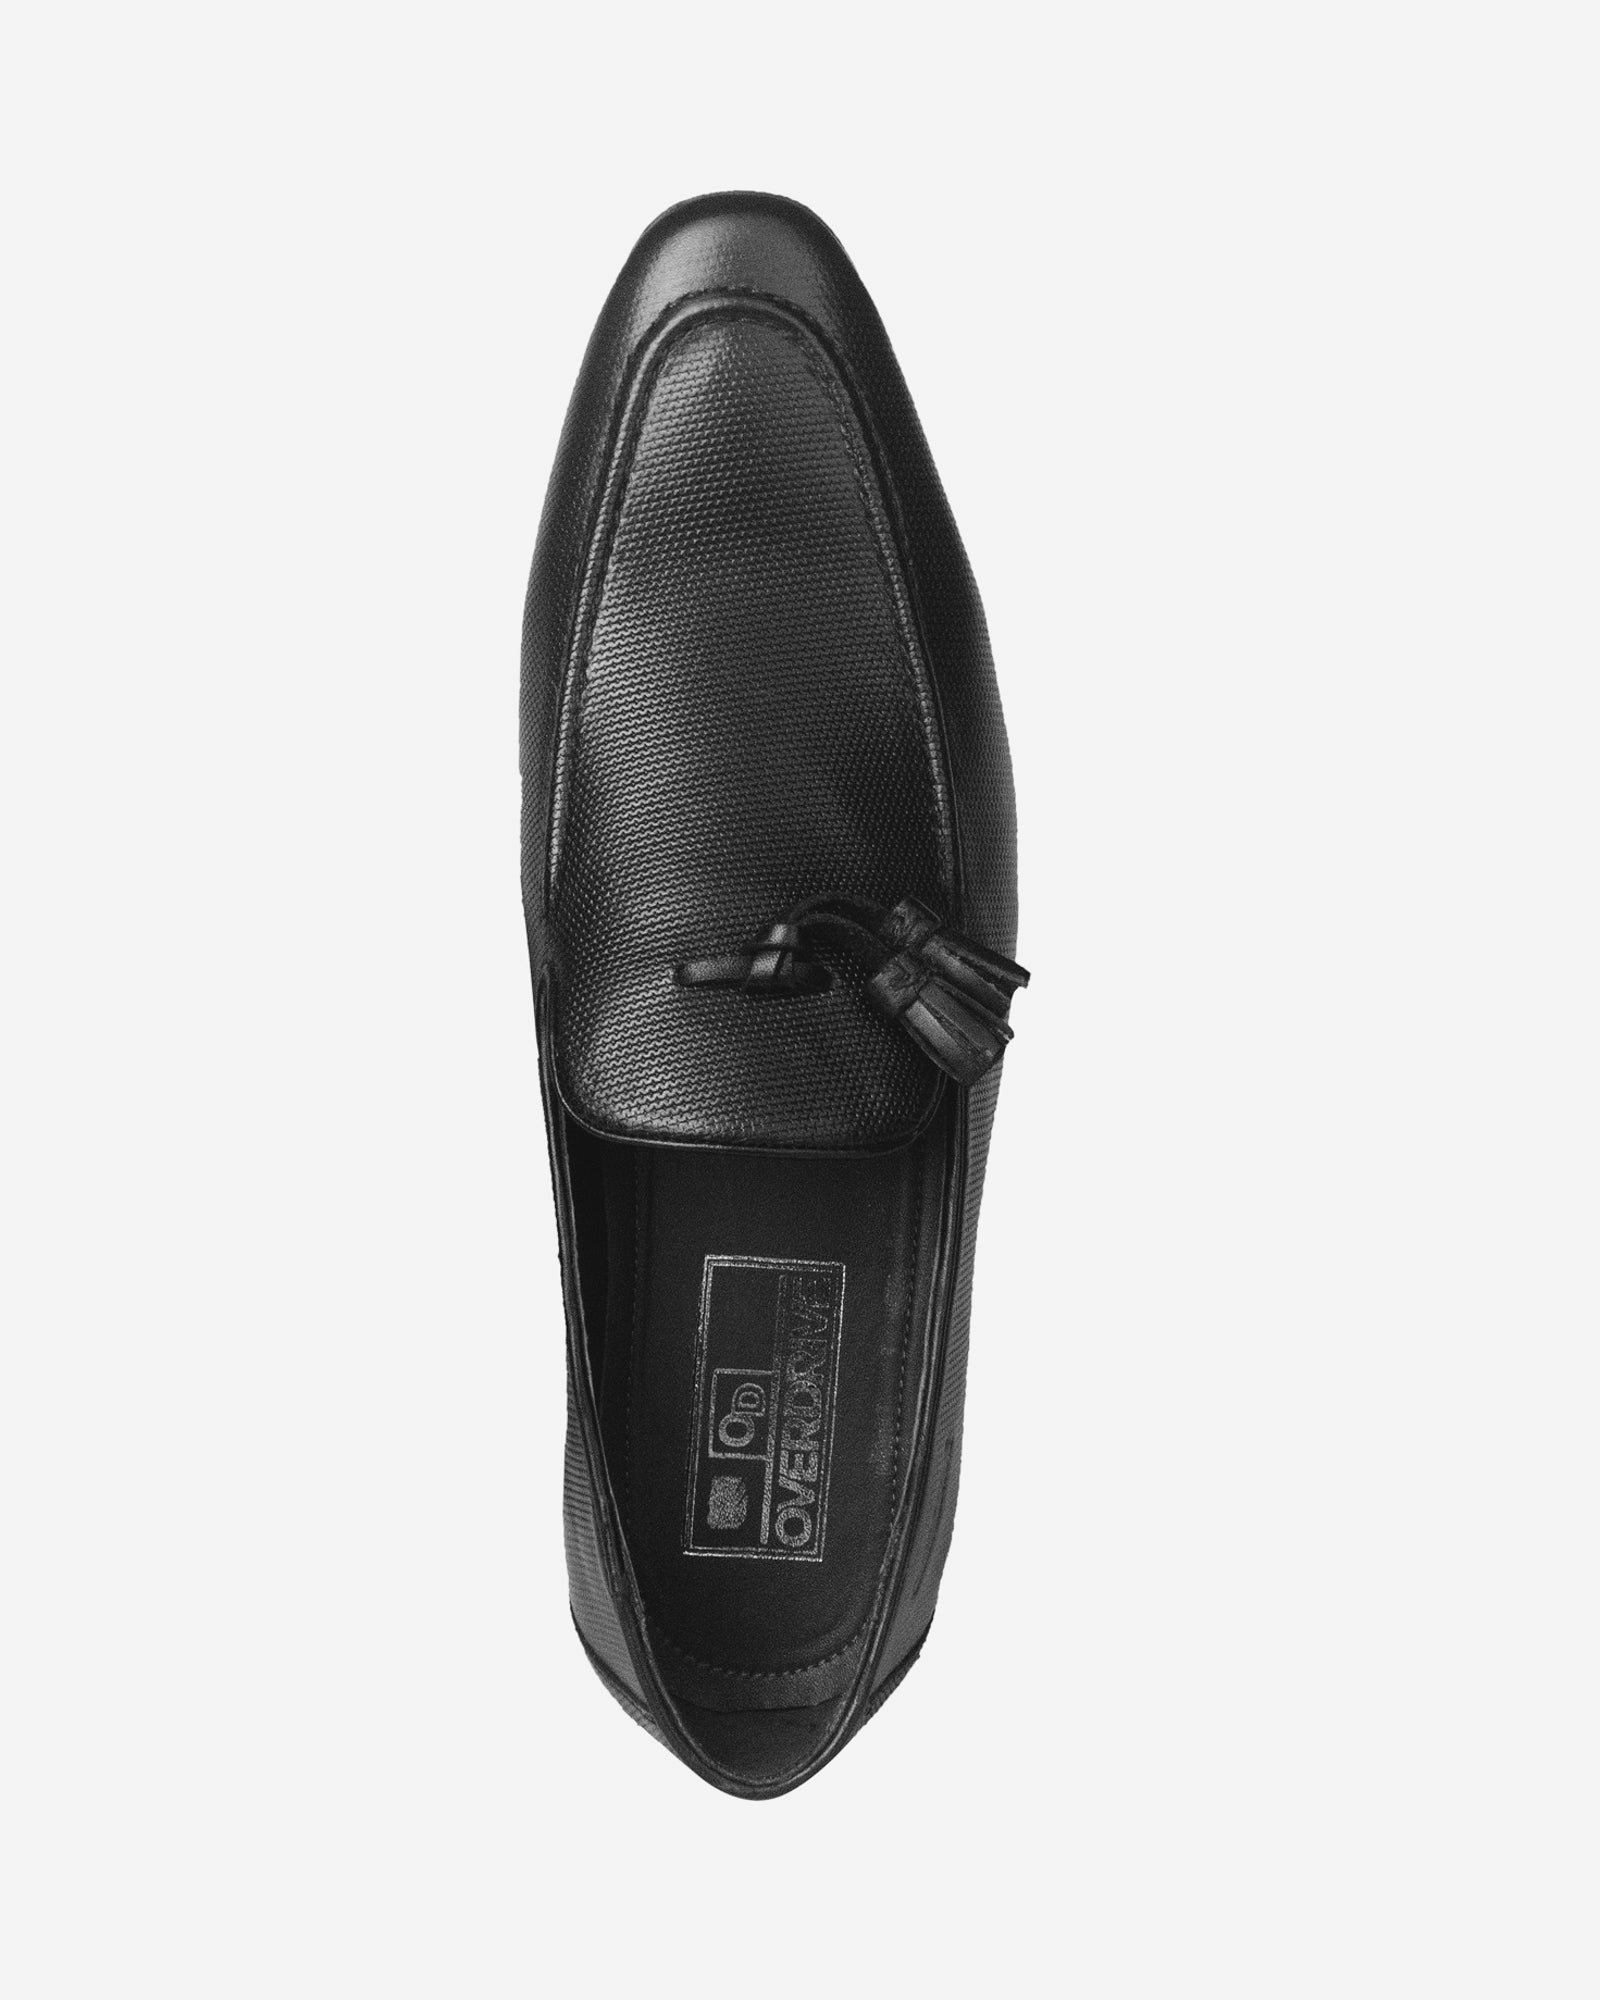 Black Commando Loafer with Tassels